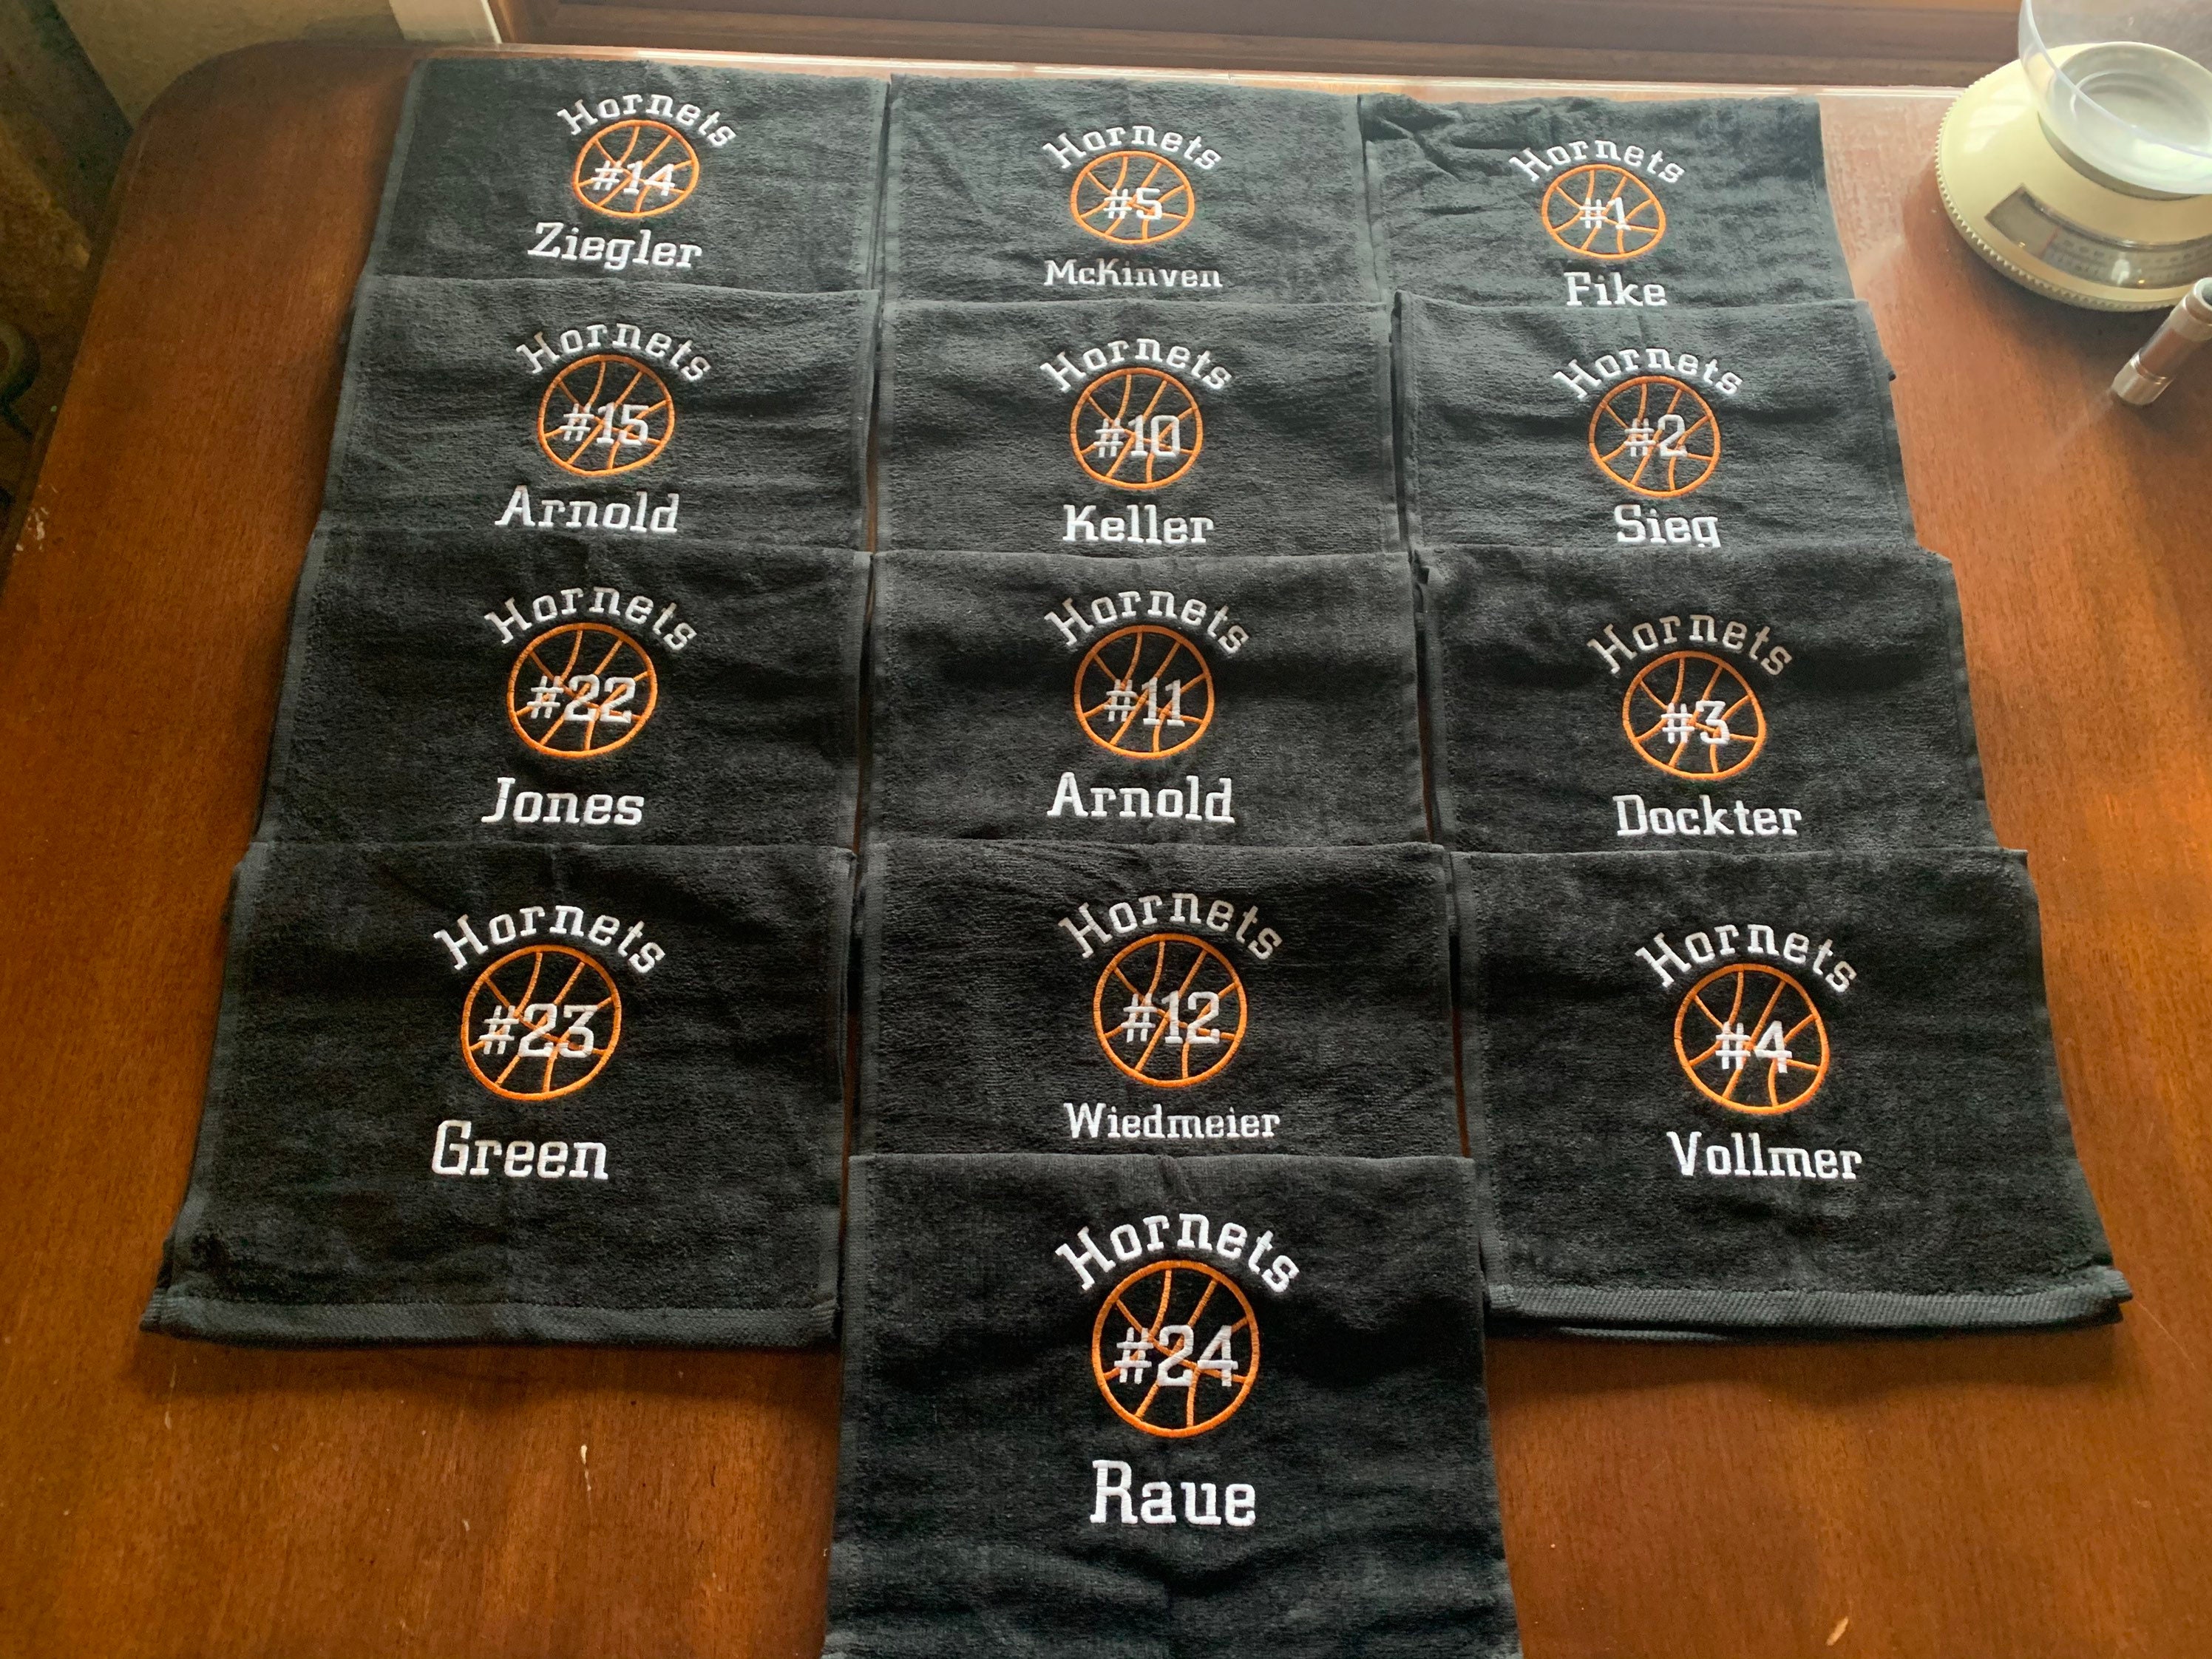 Personalized Basketball Towels With Custom Embroidery Included All